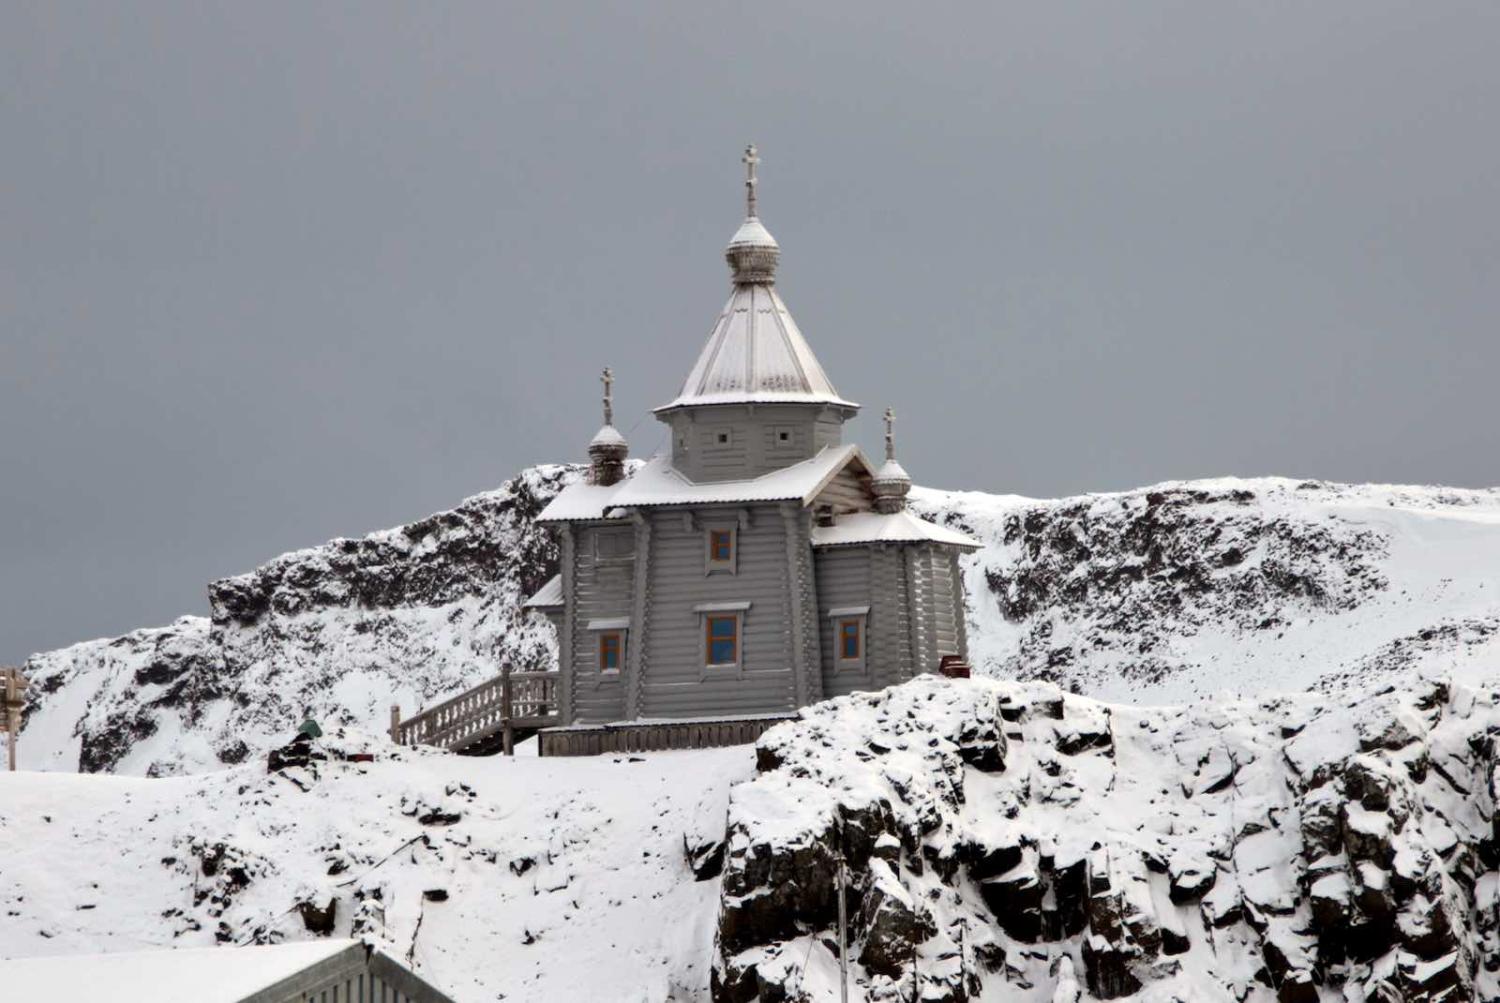 The Orthodox Church in the Russian Bellingshausen Station in Antarctica, photographed in 2014 (Vanderlei Almeida/AFP/Getty Images)